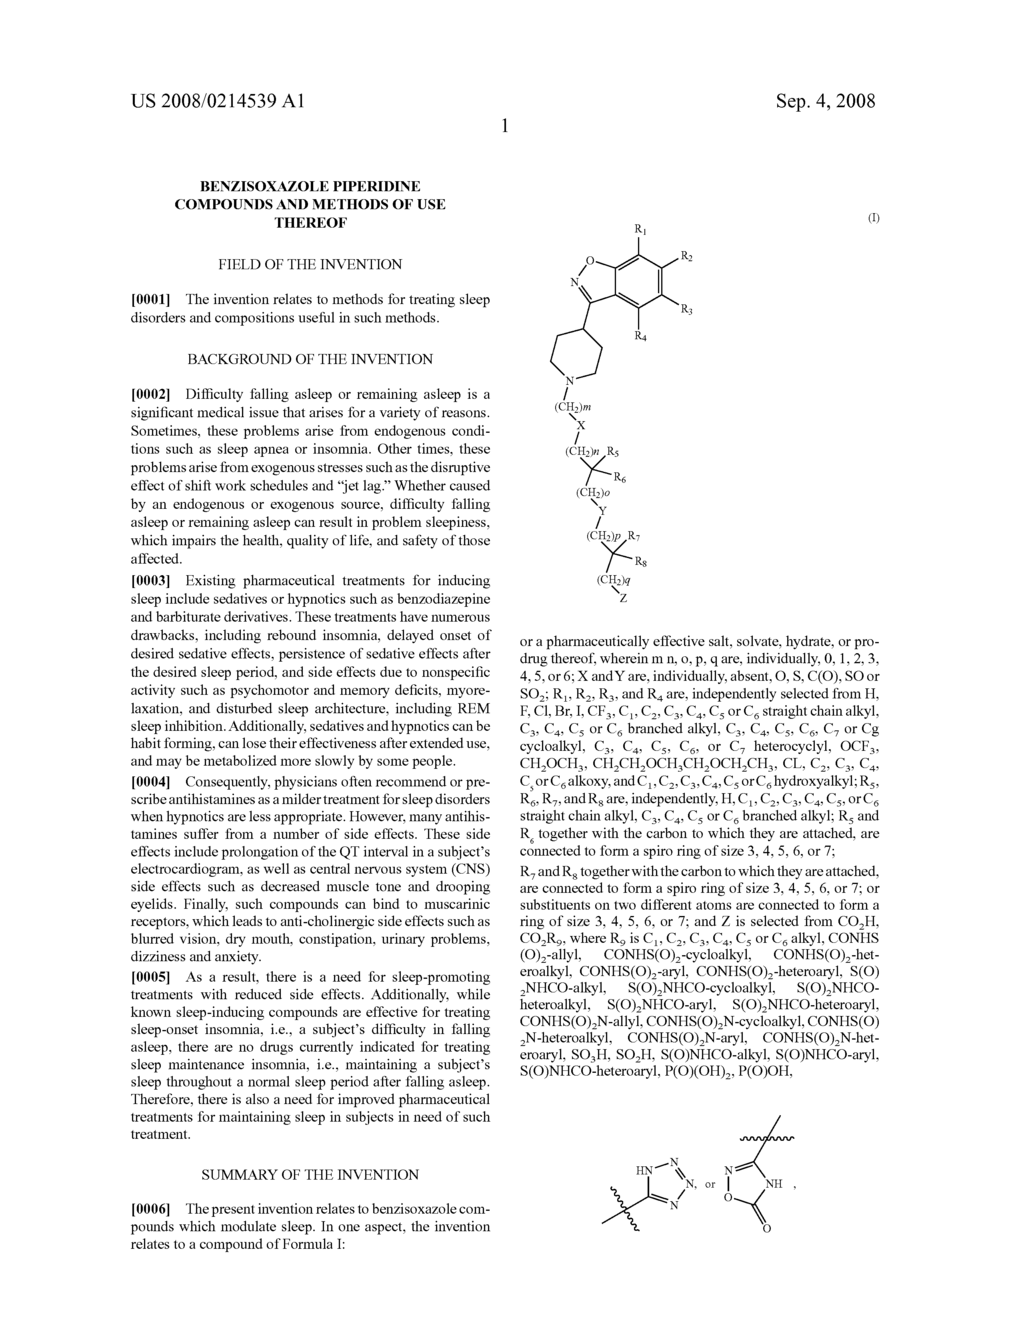 Benzisoxazole Piperidine Compounds and Methods of Use Thereof - diagram, schematic, and image 02